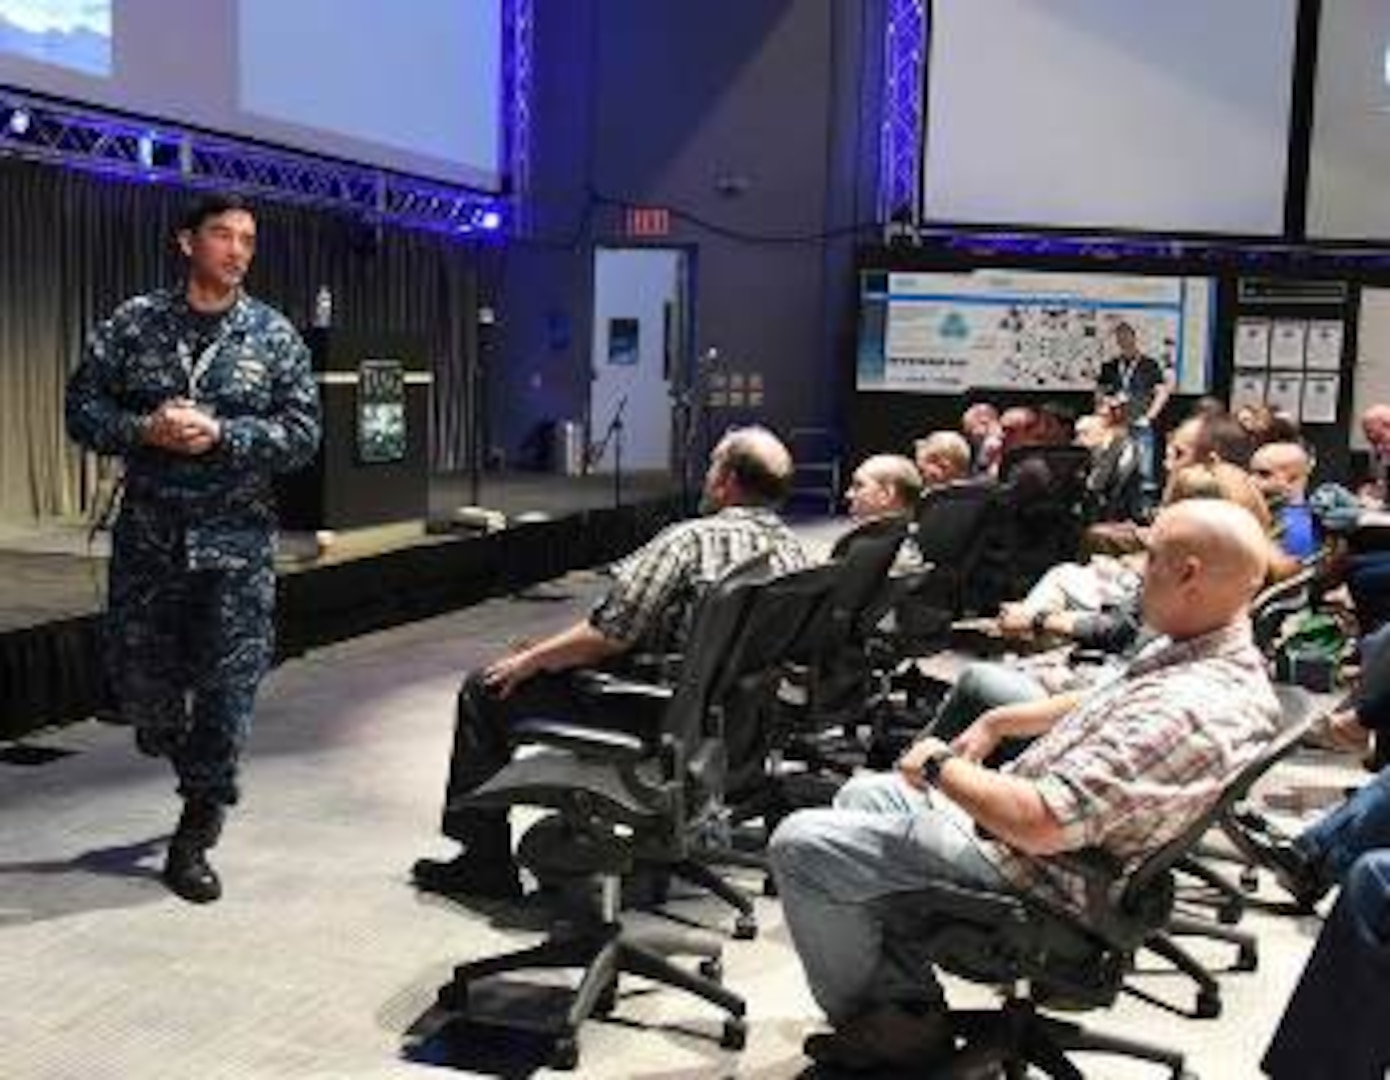 Rear Admiral Patrick Piercey, Commander Naval Surface Force Atlantic, discusses his thoughts on toughness and resiliency to the gathered innovators at a Tactical Advancement for the Next Generation (TANG) event focusing on Sailor toughness.